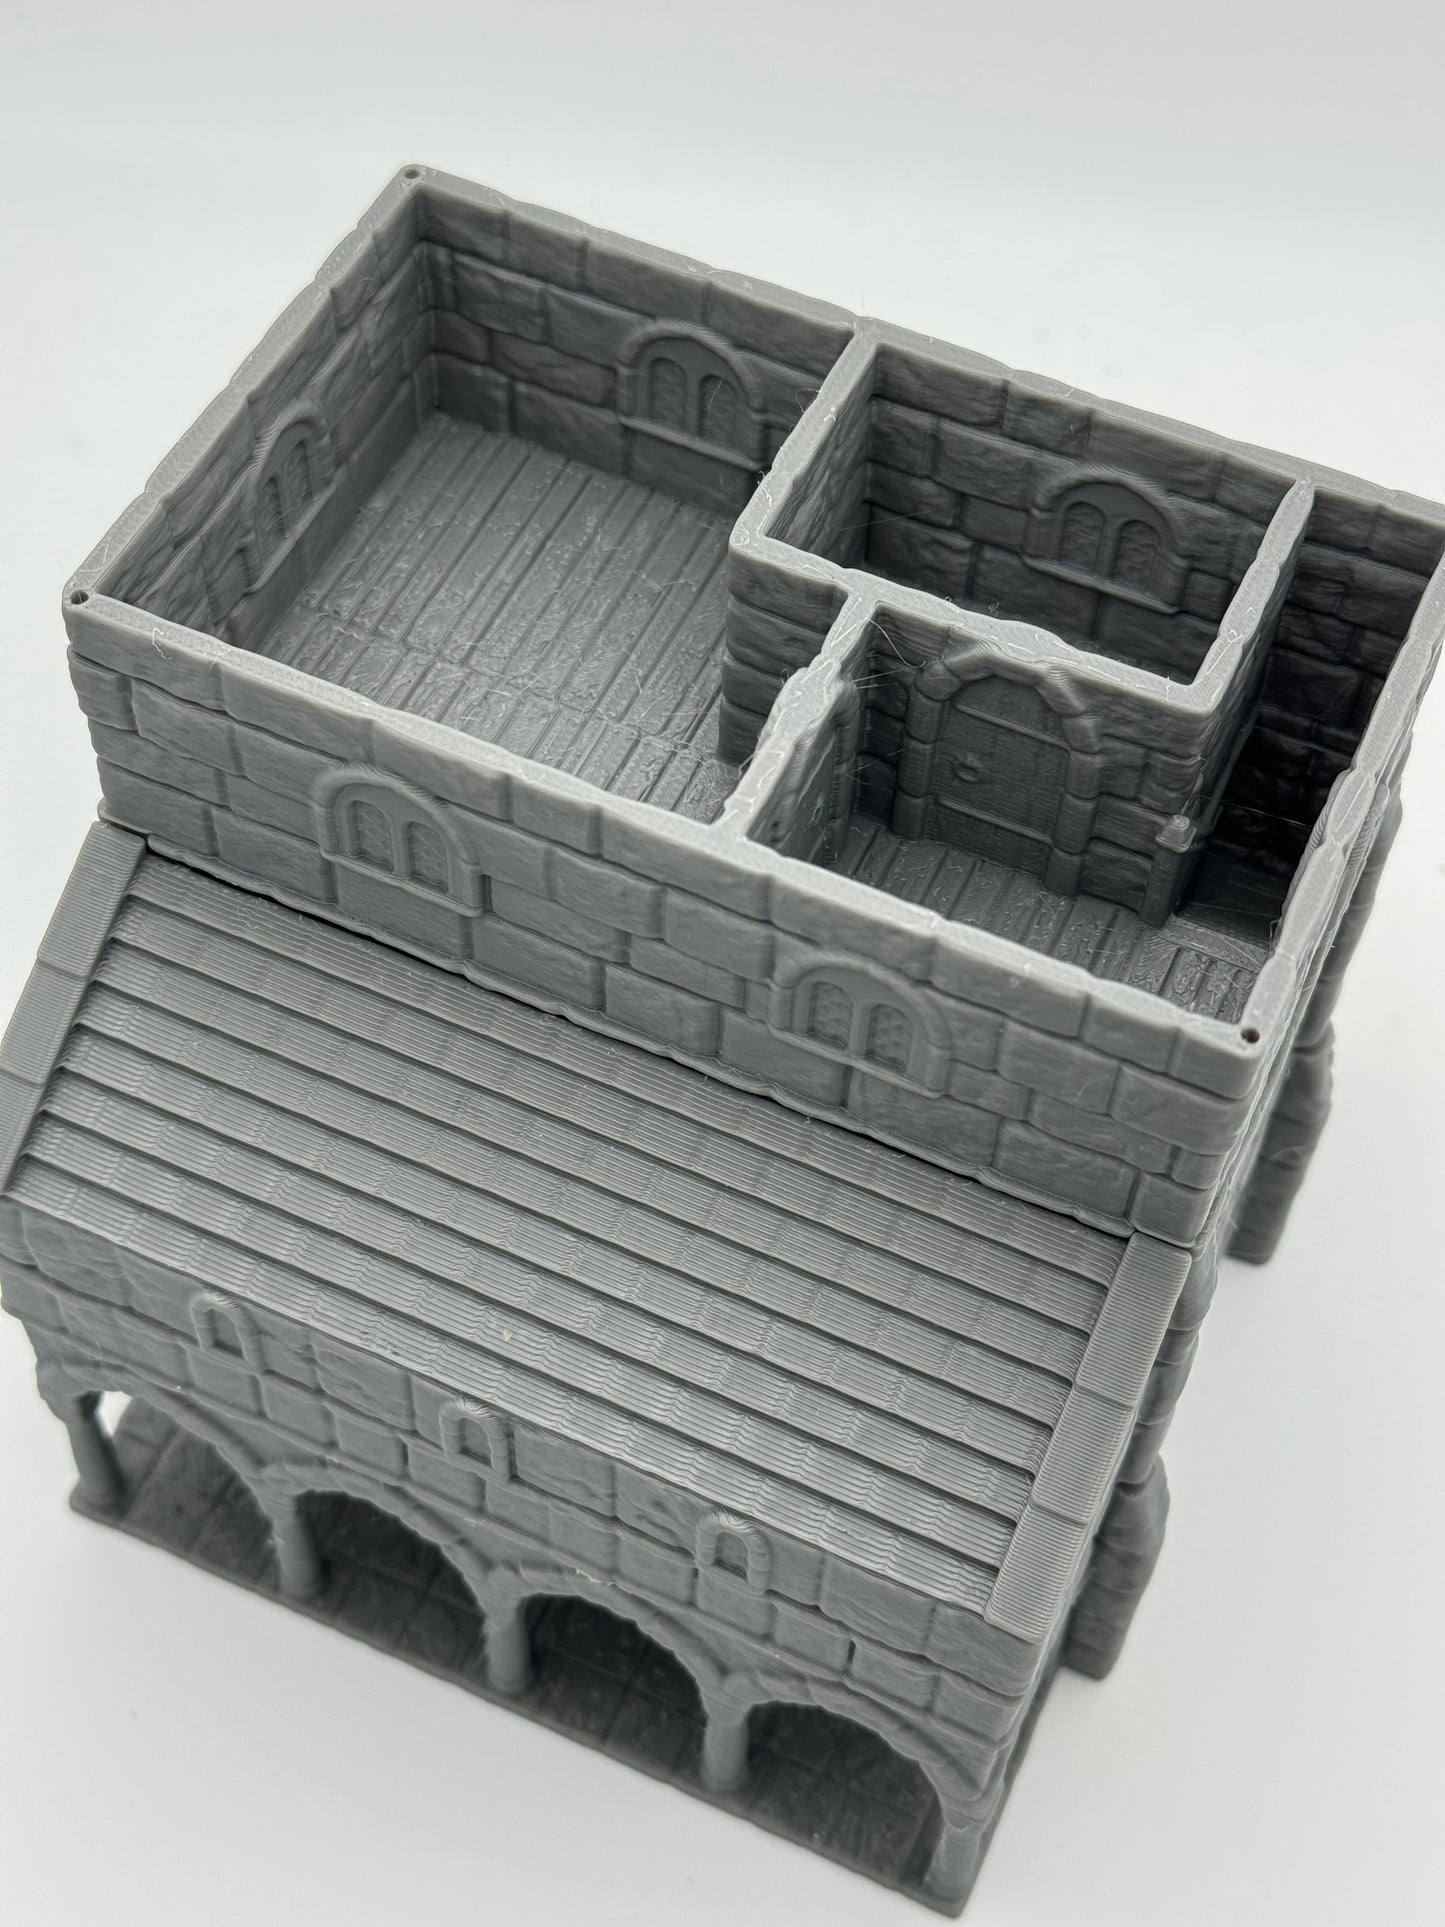 Produktfoto Tabletop 28mm The Printing Goes Ever On (TPGEO)  0: Haus B Ivory City - Gebäude Königreich Gonthan -  Tabletop Terrain